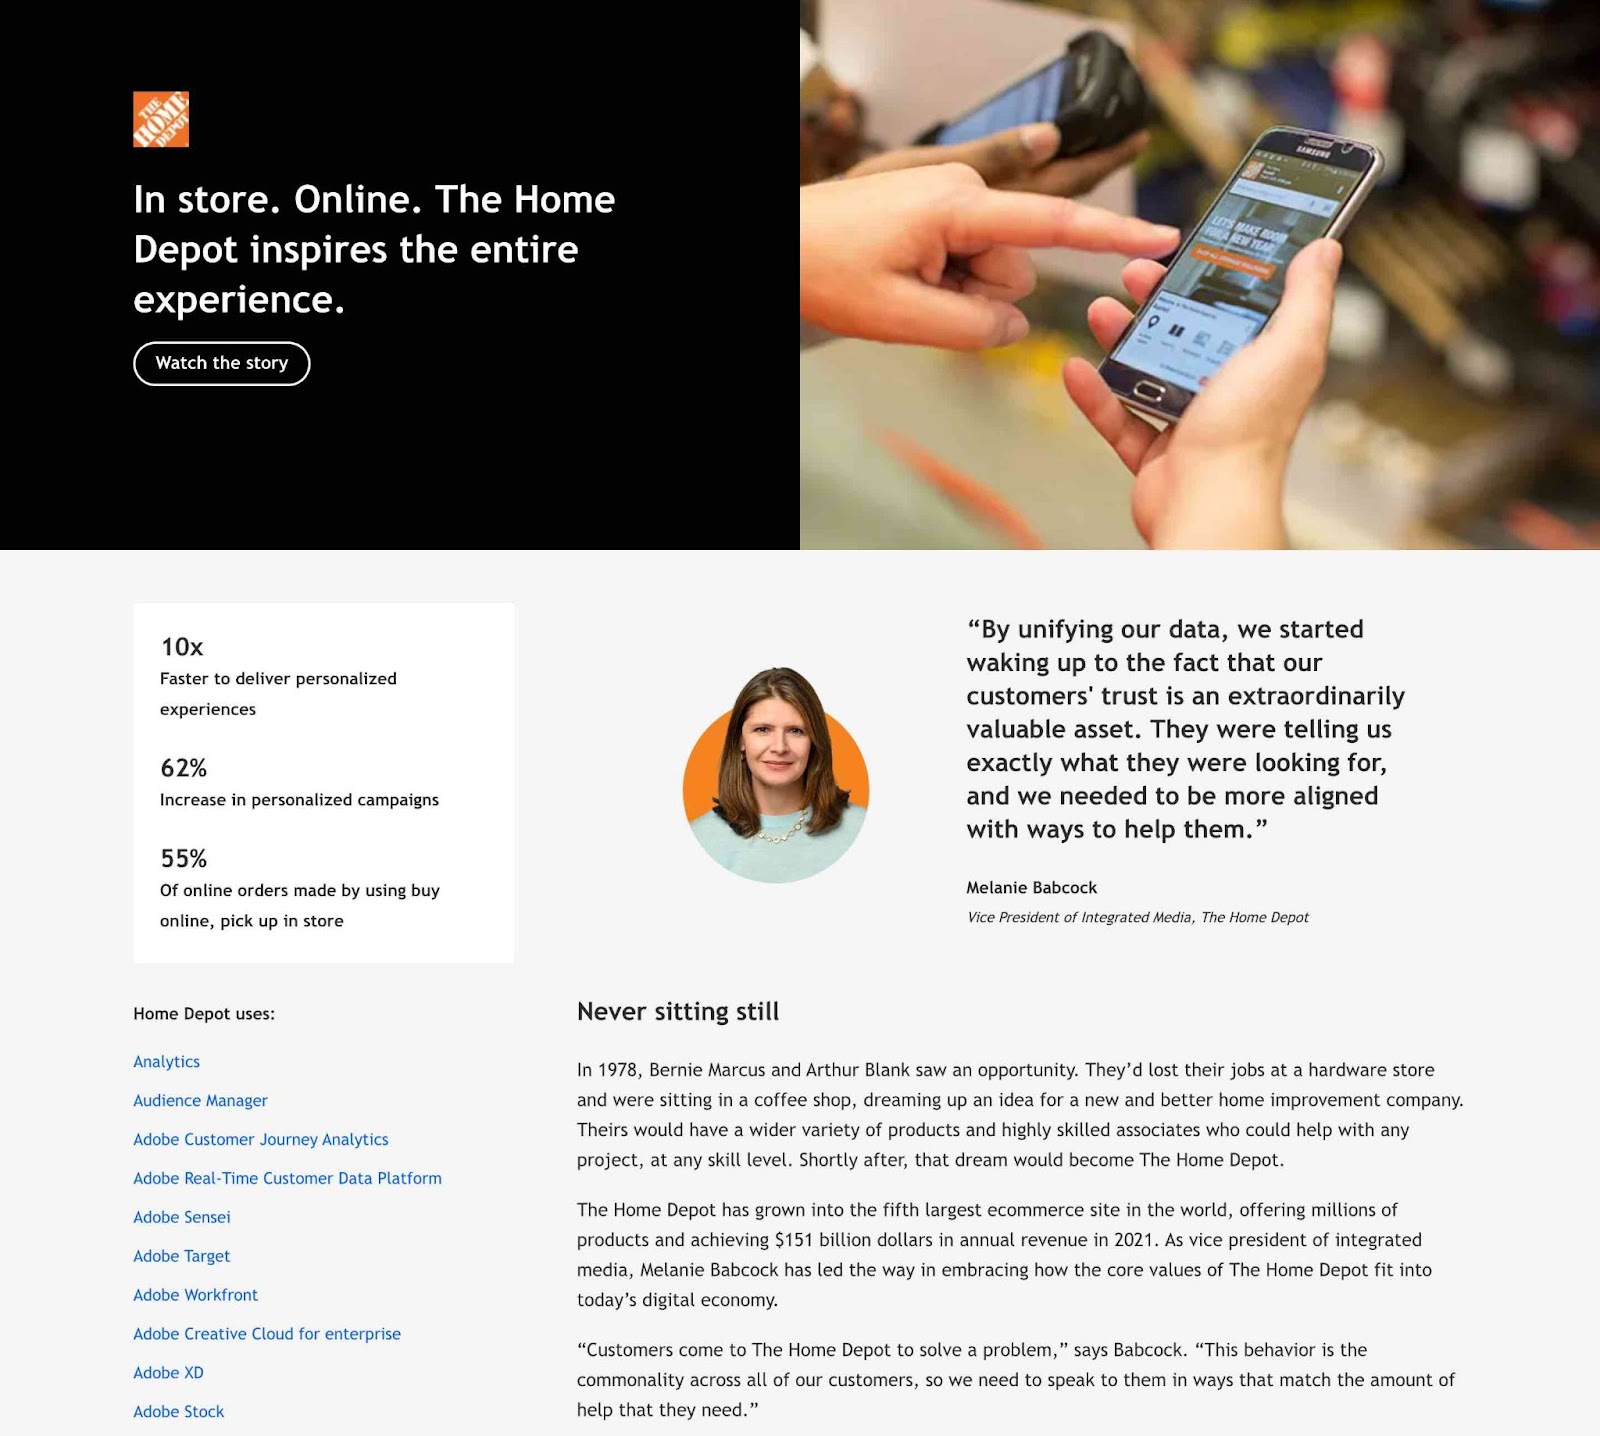 Adobe and The Home Depot case study landing page